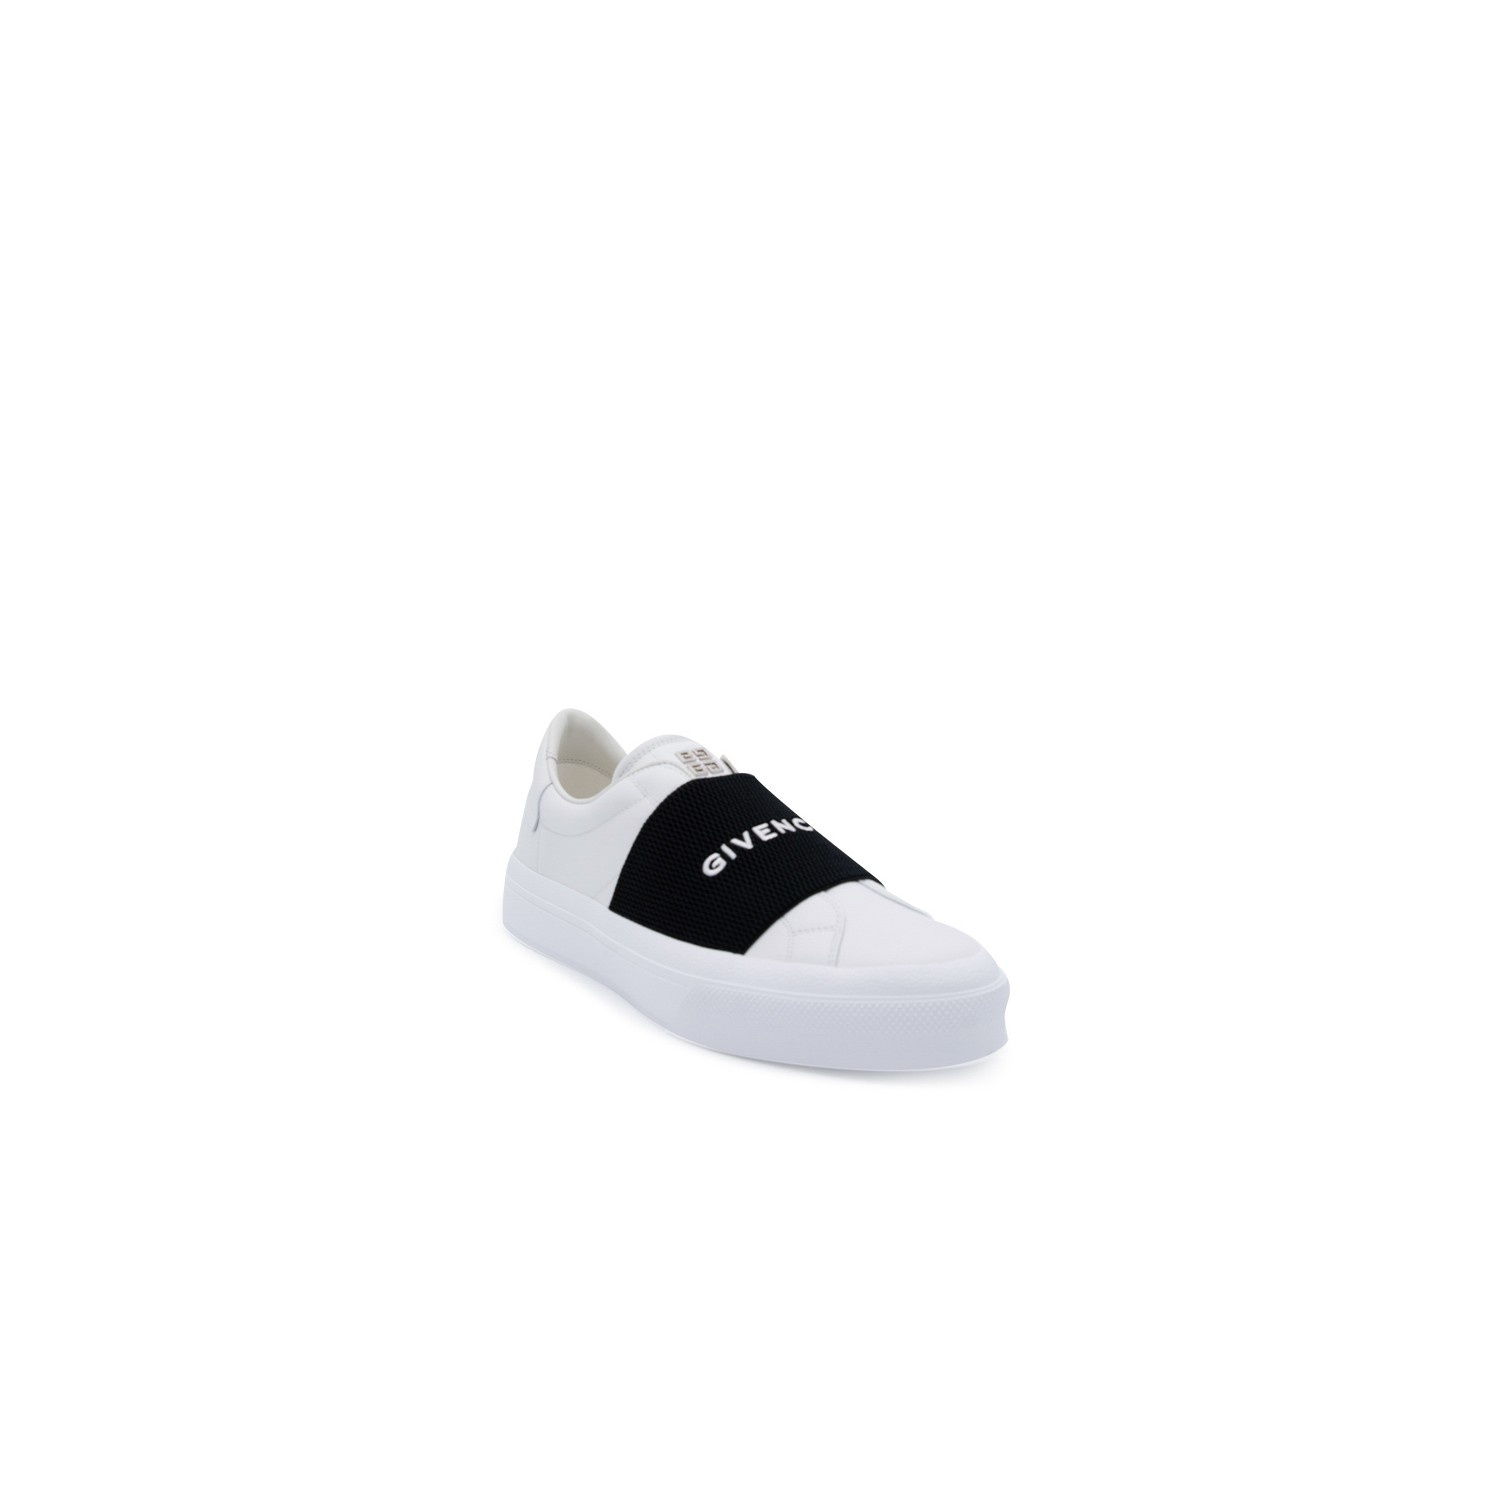 WHITE AND BLACK LEATHER CITY SPORT LOW TOP SNEAKERS - 2